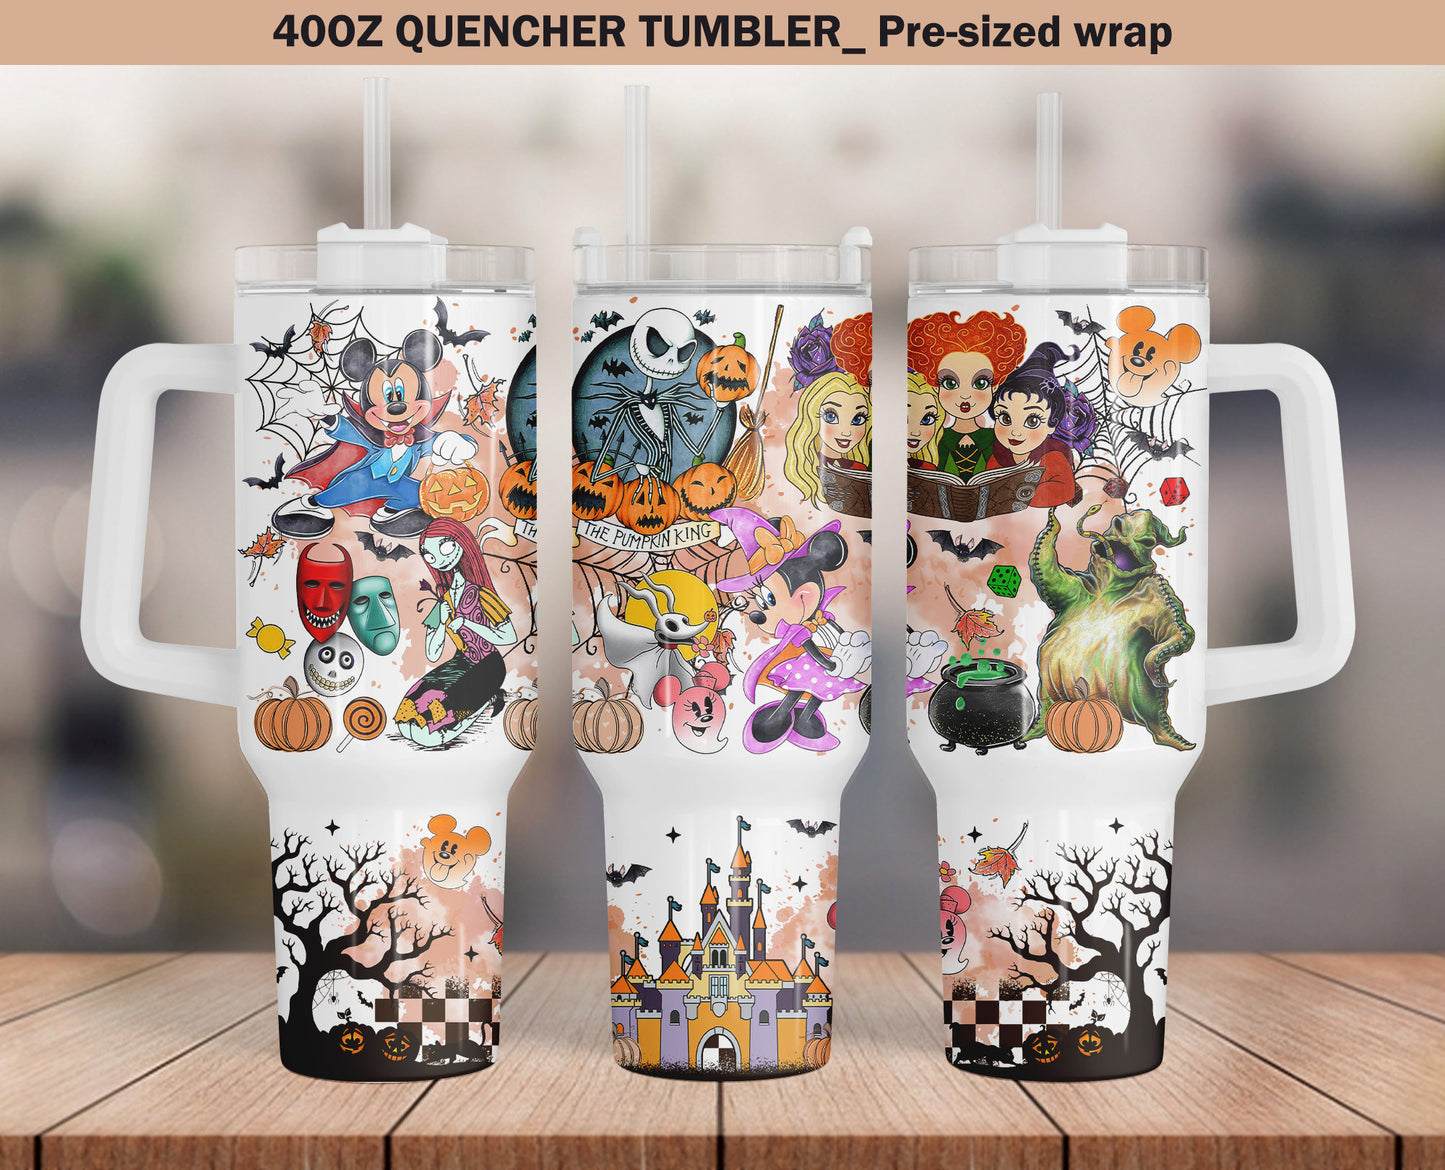 Witch 40oz Tumbler, Witch Tumbler, Cartoon Tumbler, 40oz Quencher Tumbler, Sublimation Design, Spooky Vibes, Spooky Season, Halloween Png